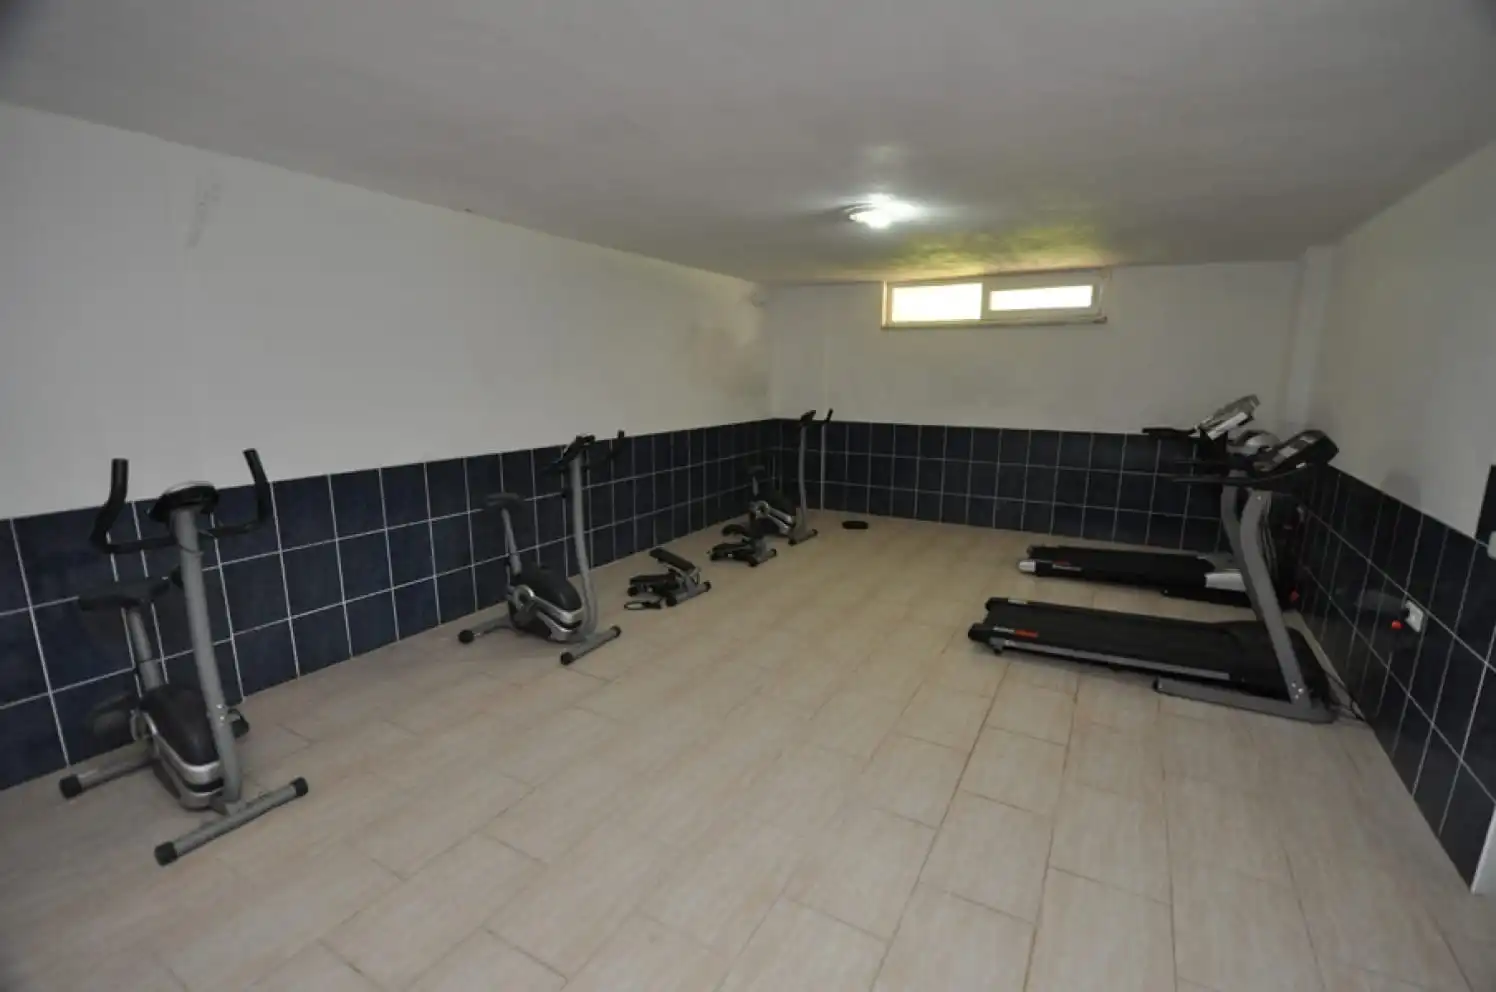 3+1 FURNISHED penthouse DUPLEX APARTMENT IN ALANYA OBA